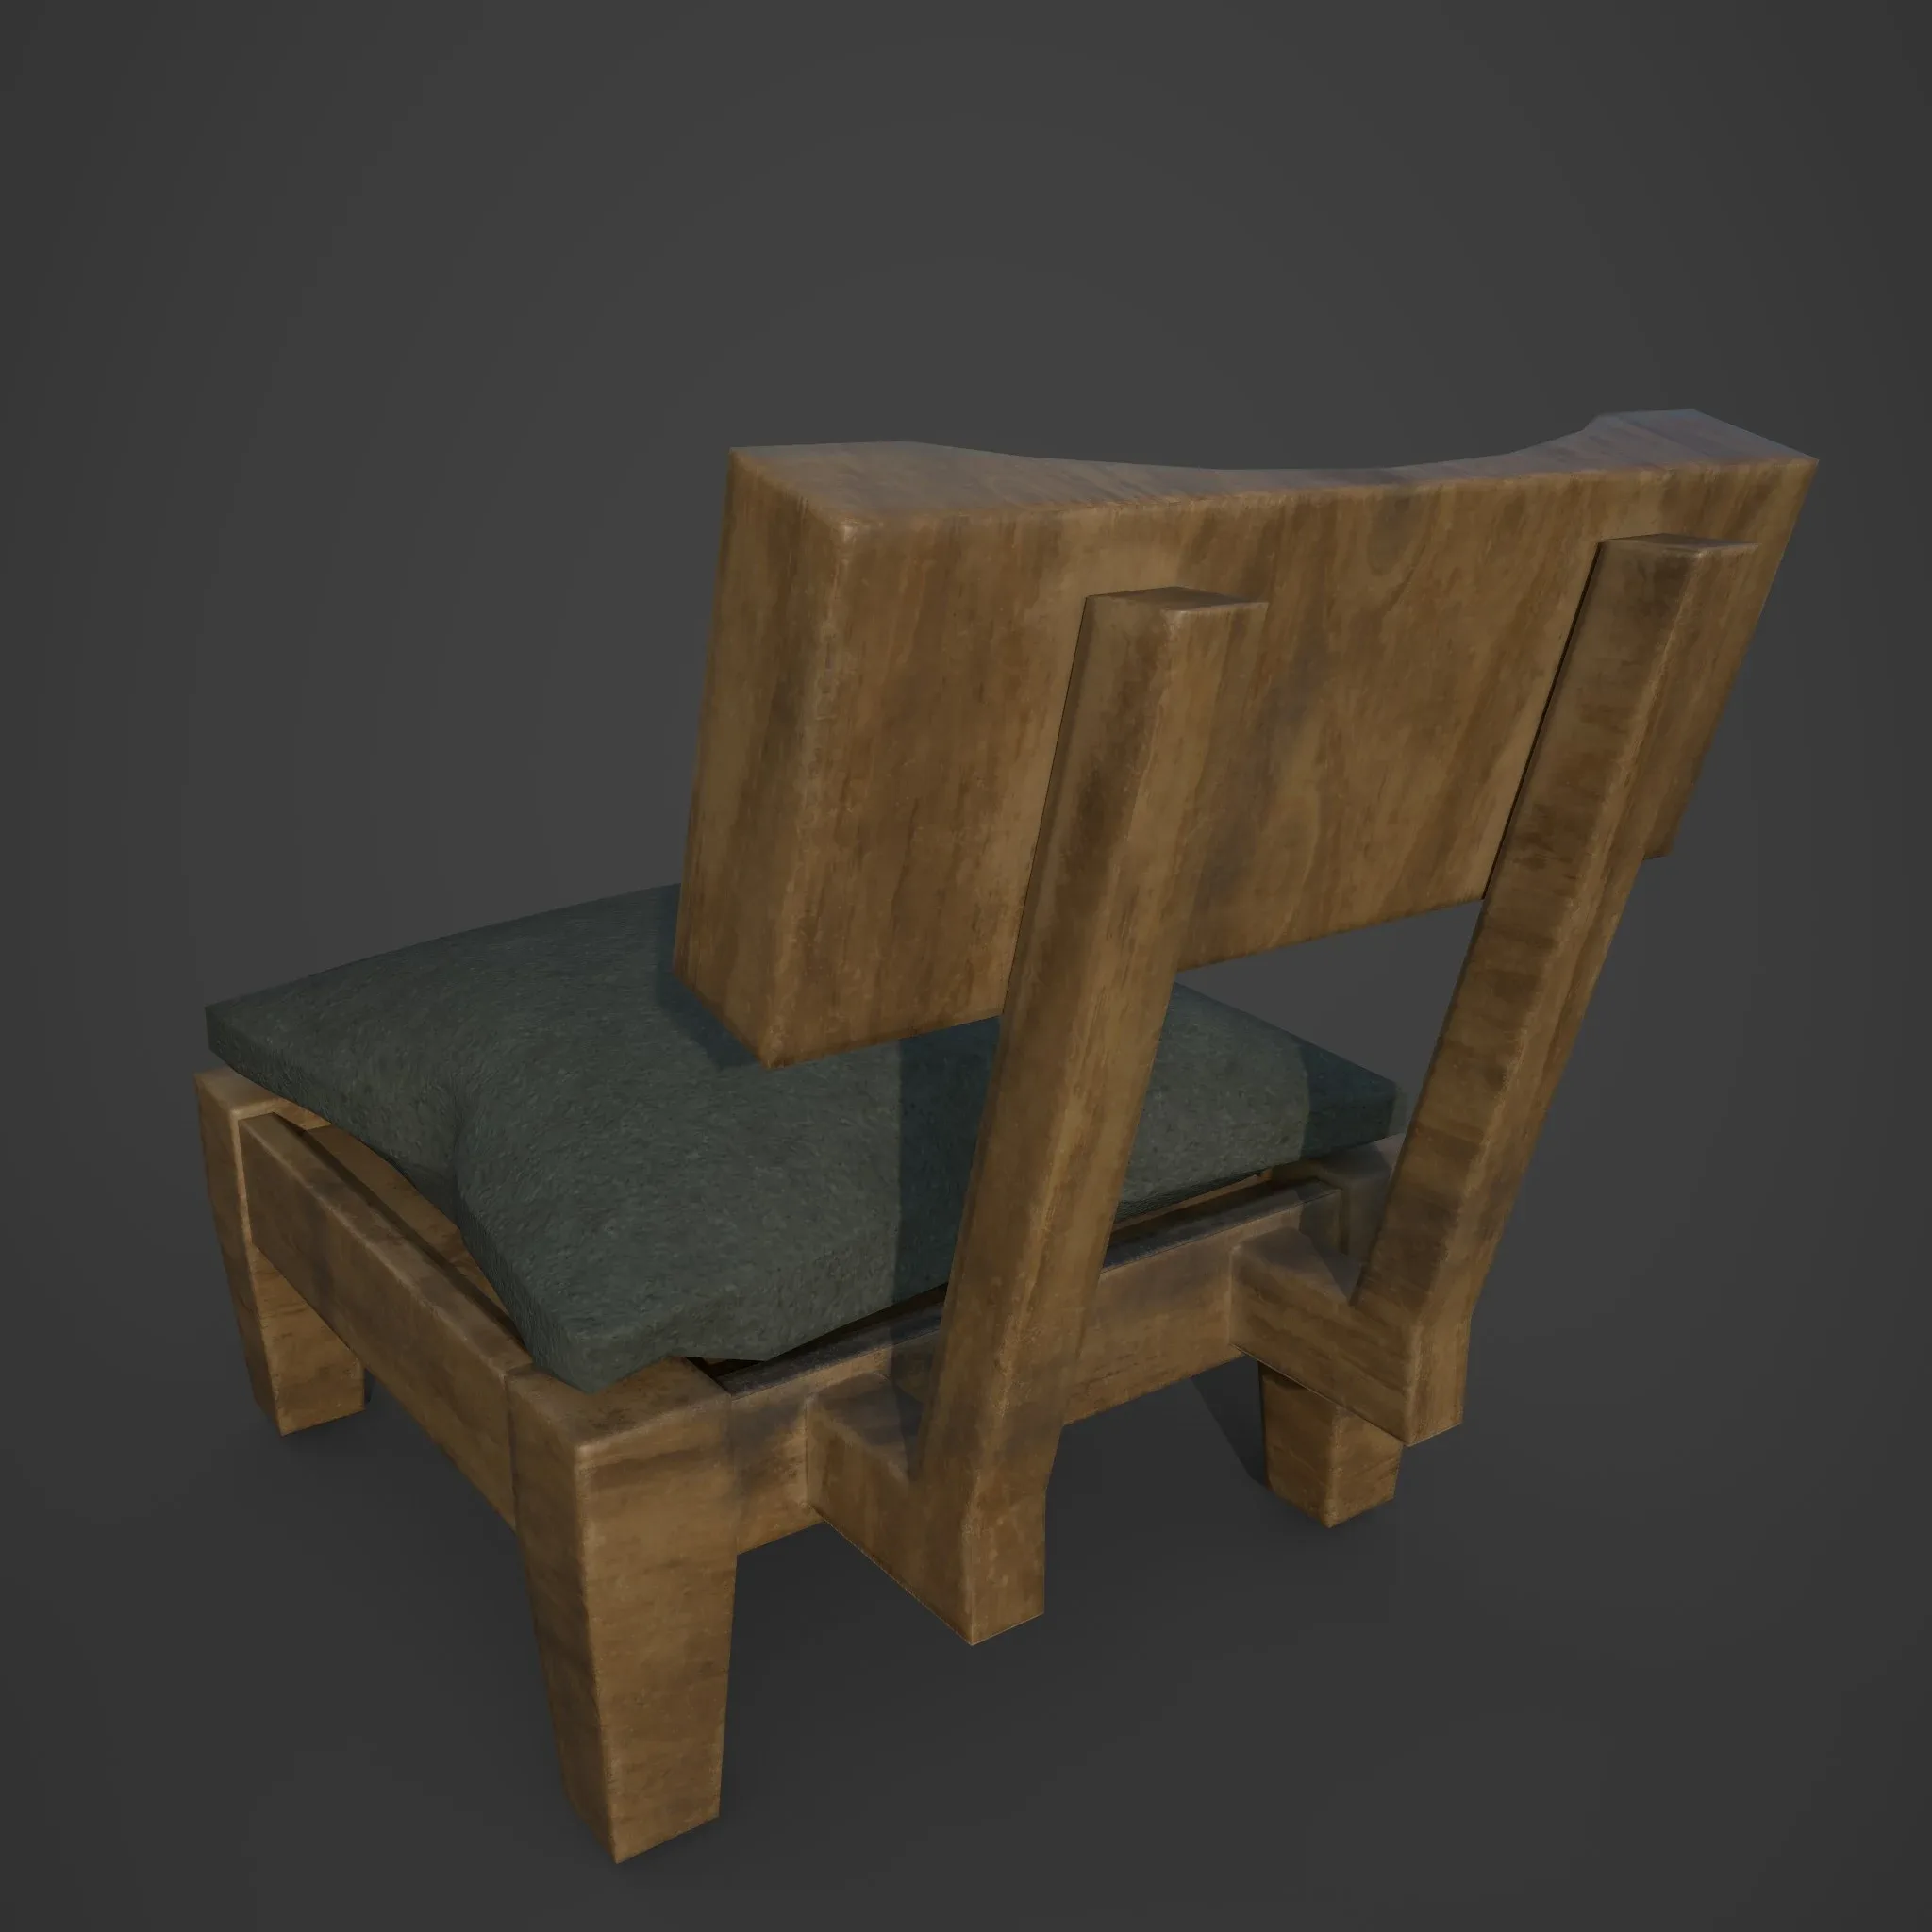 Chair - Lowpoly Game Ready - Pack 4 in One